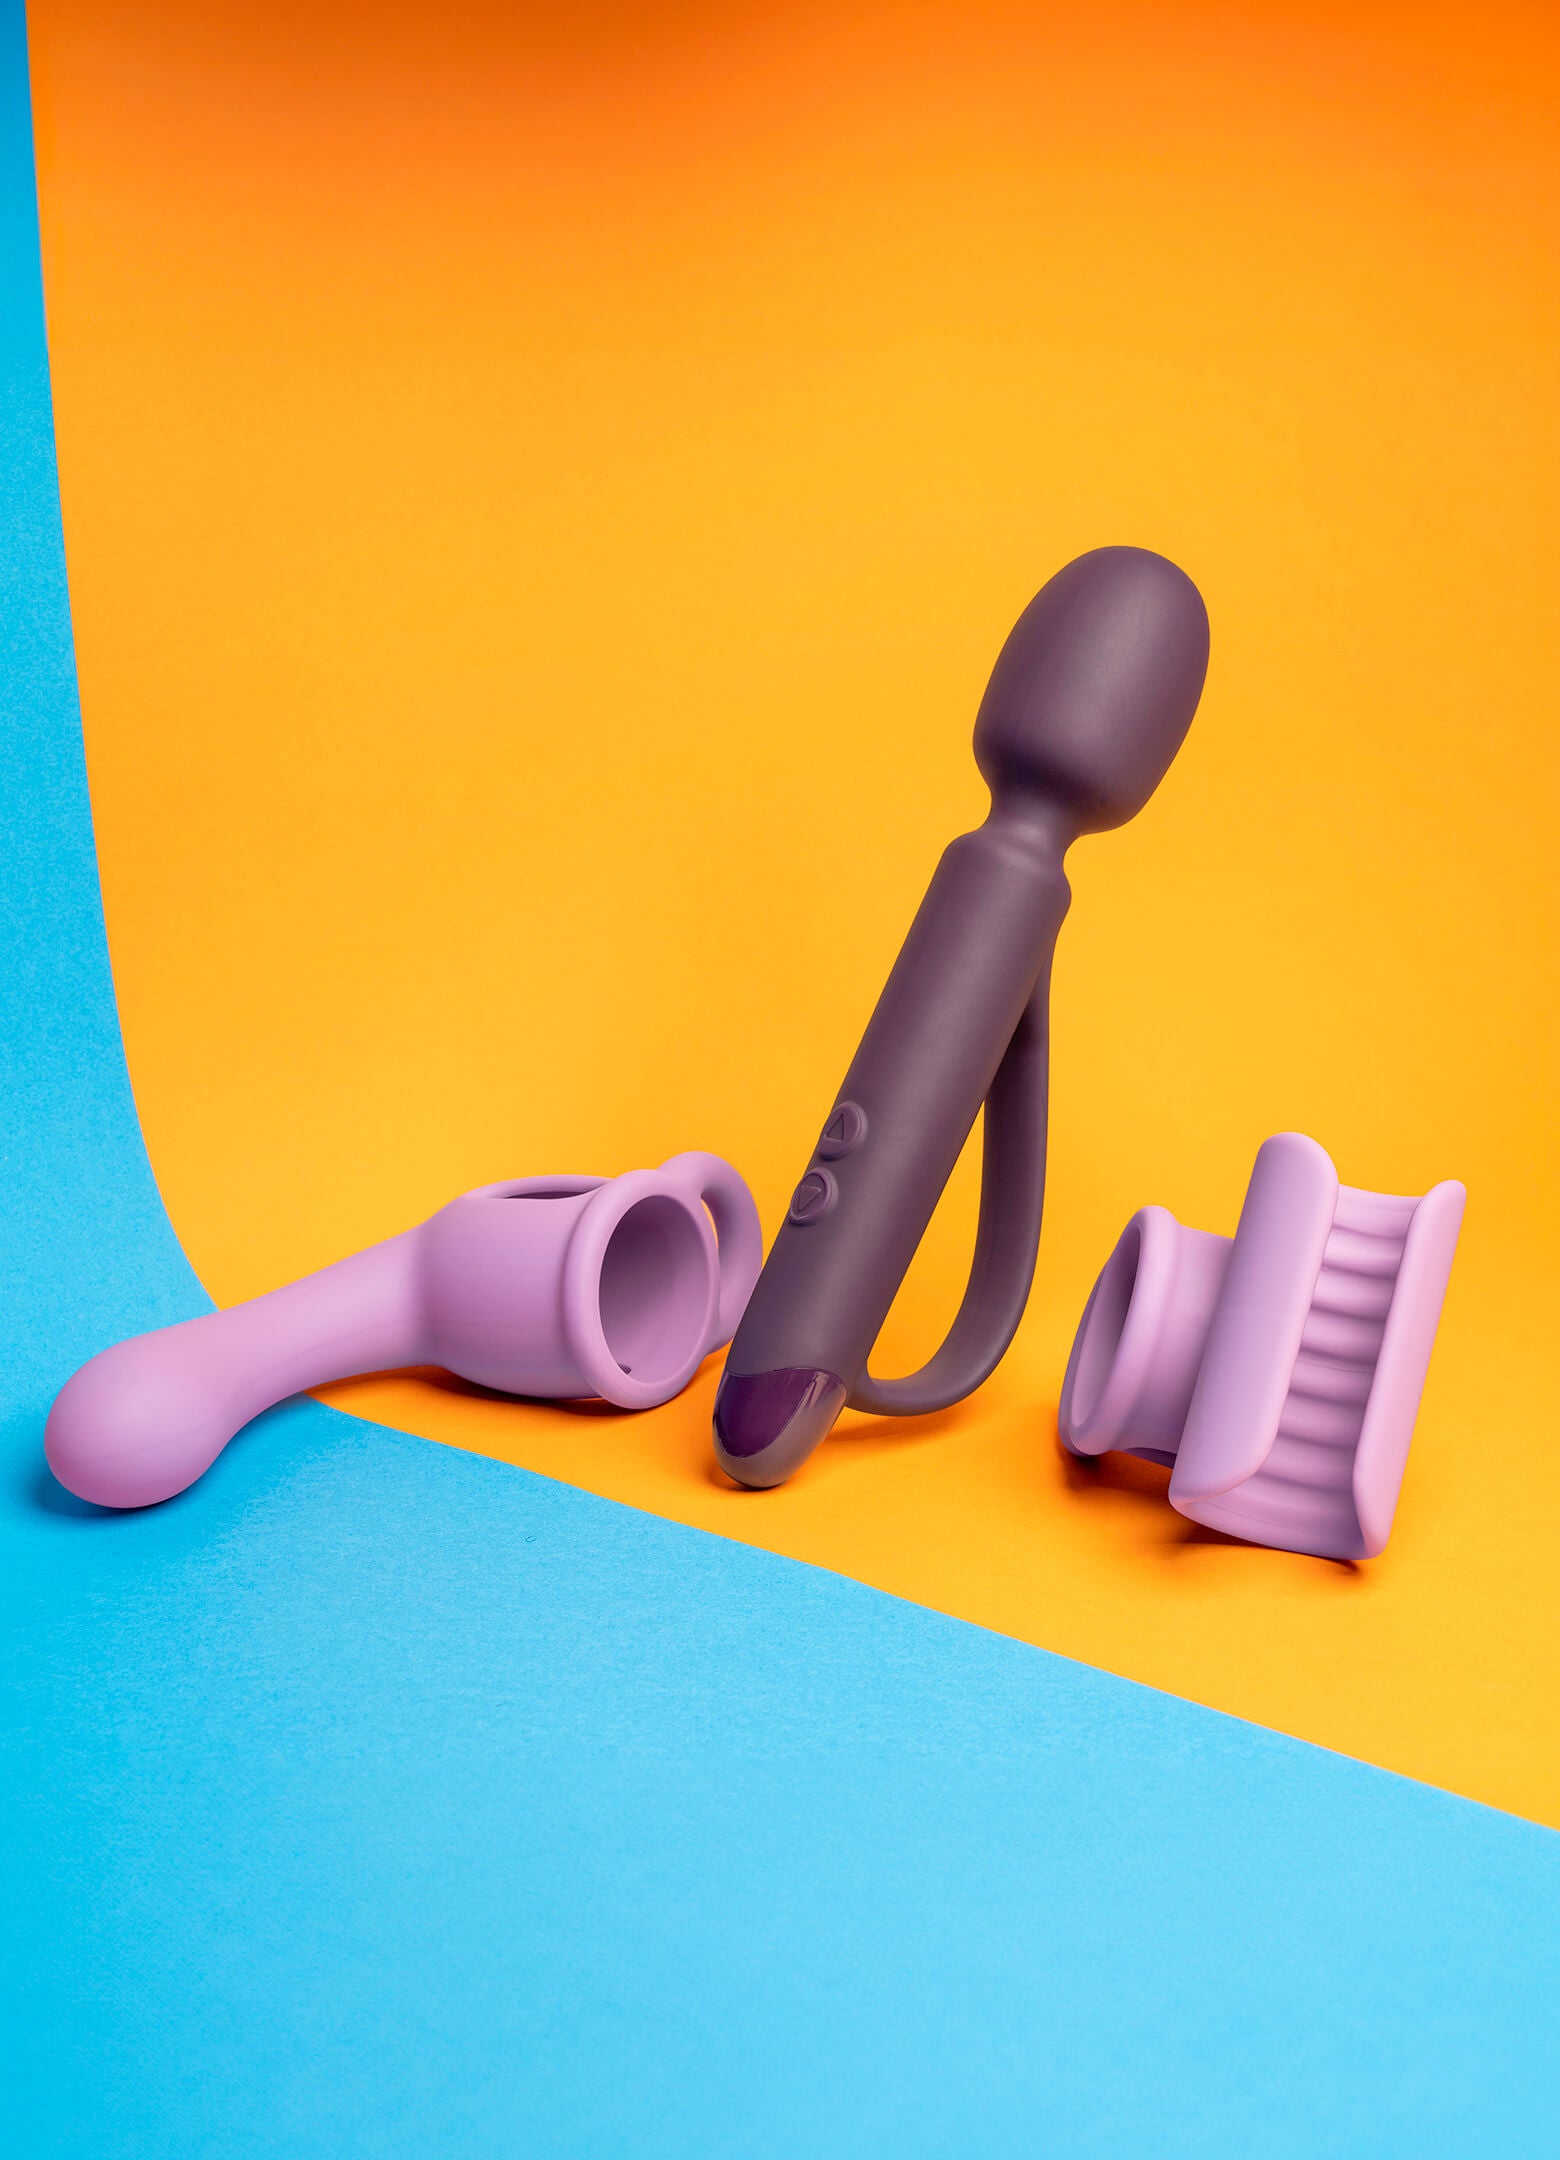 Plum purple wand vibrator with an accessible handle with separate lilac masturbator and G-spot/prostate attachments.